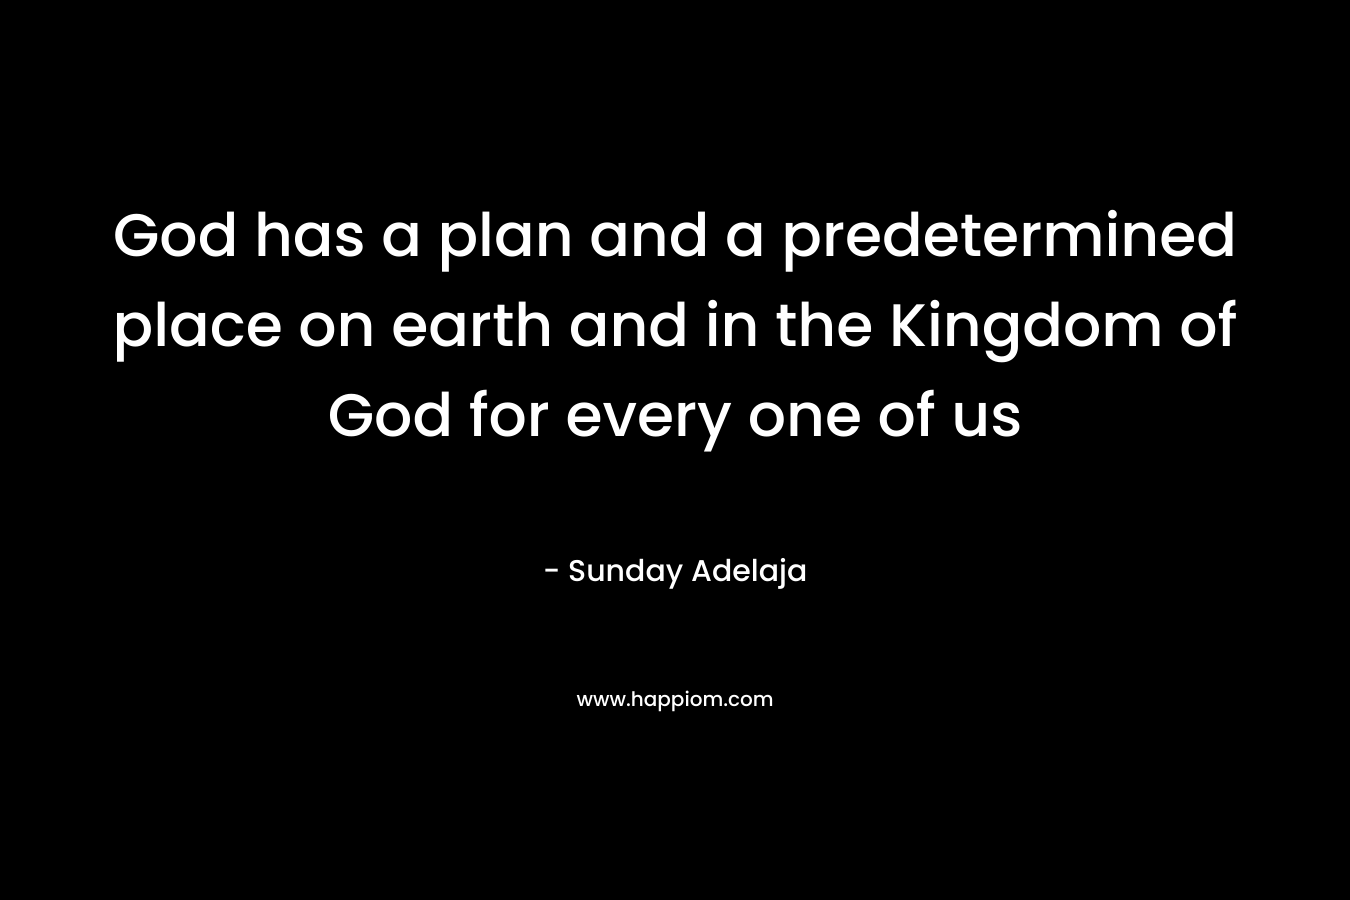 God has a plan and a predetermined place on earth and in the Kingdom of God for every one of us